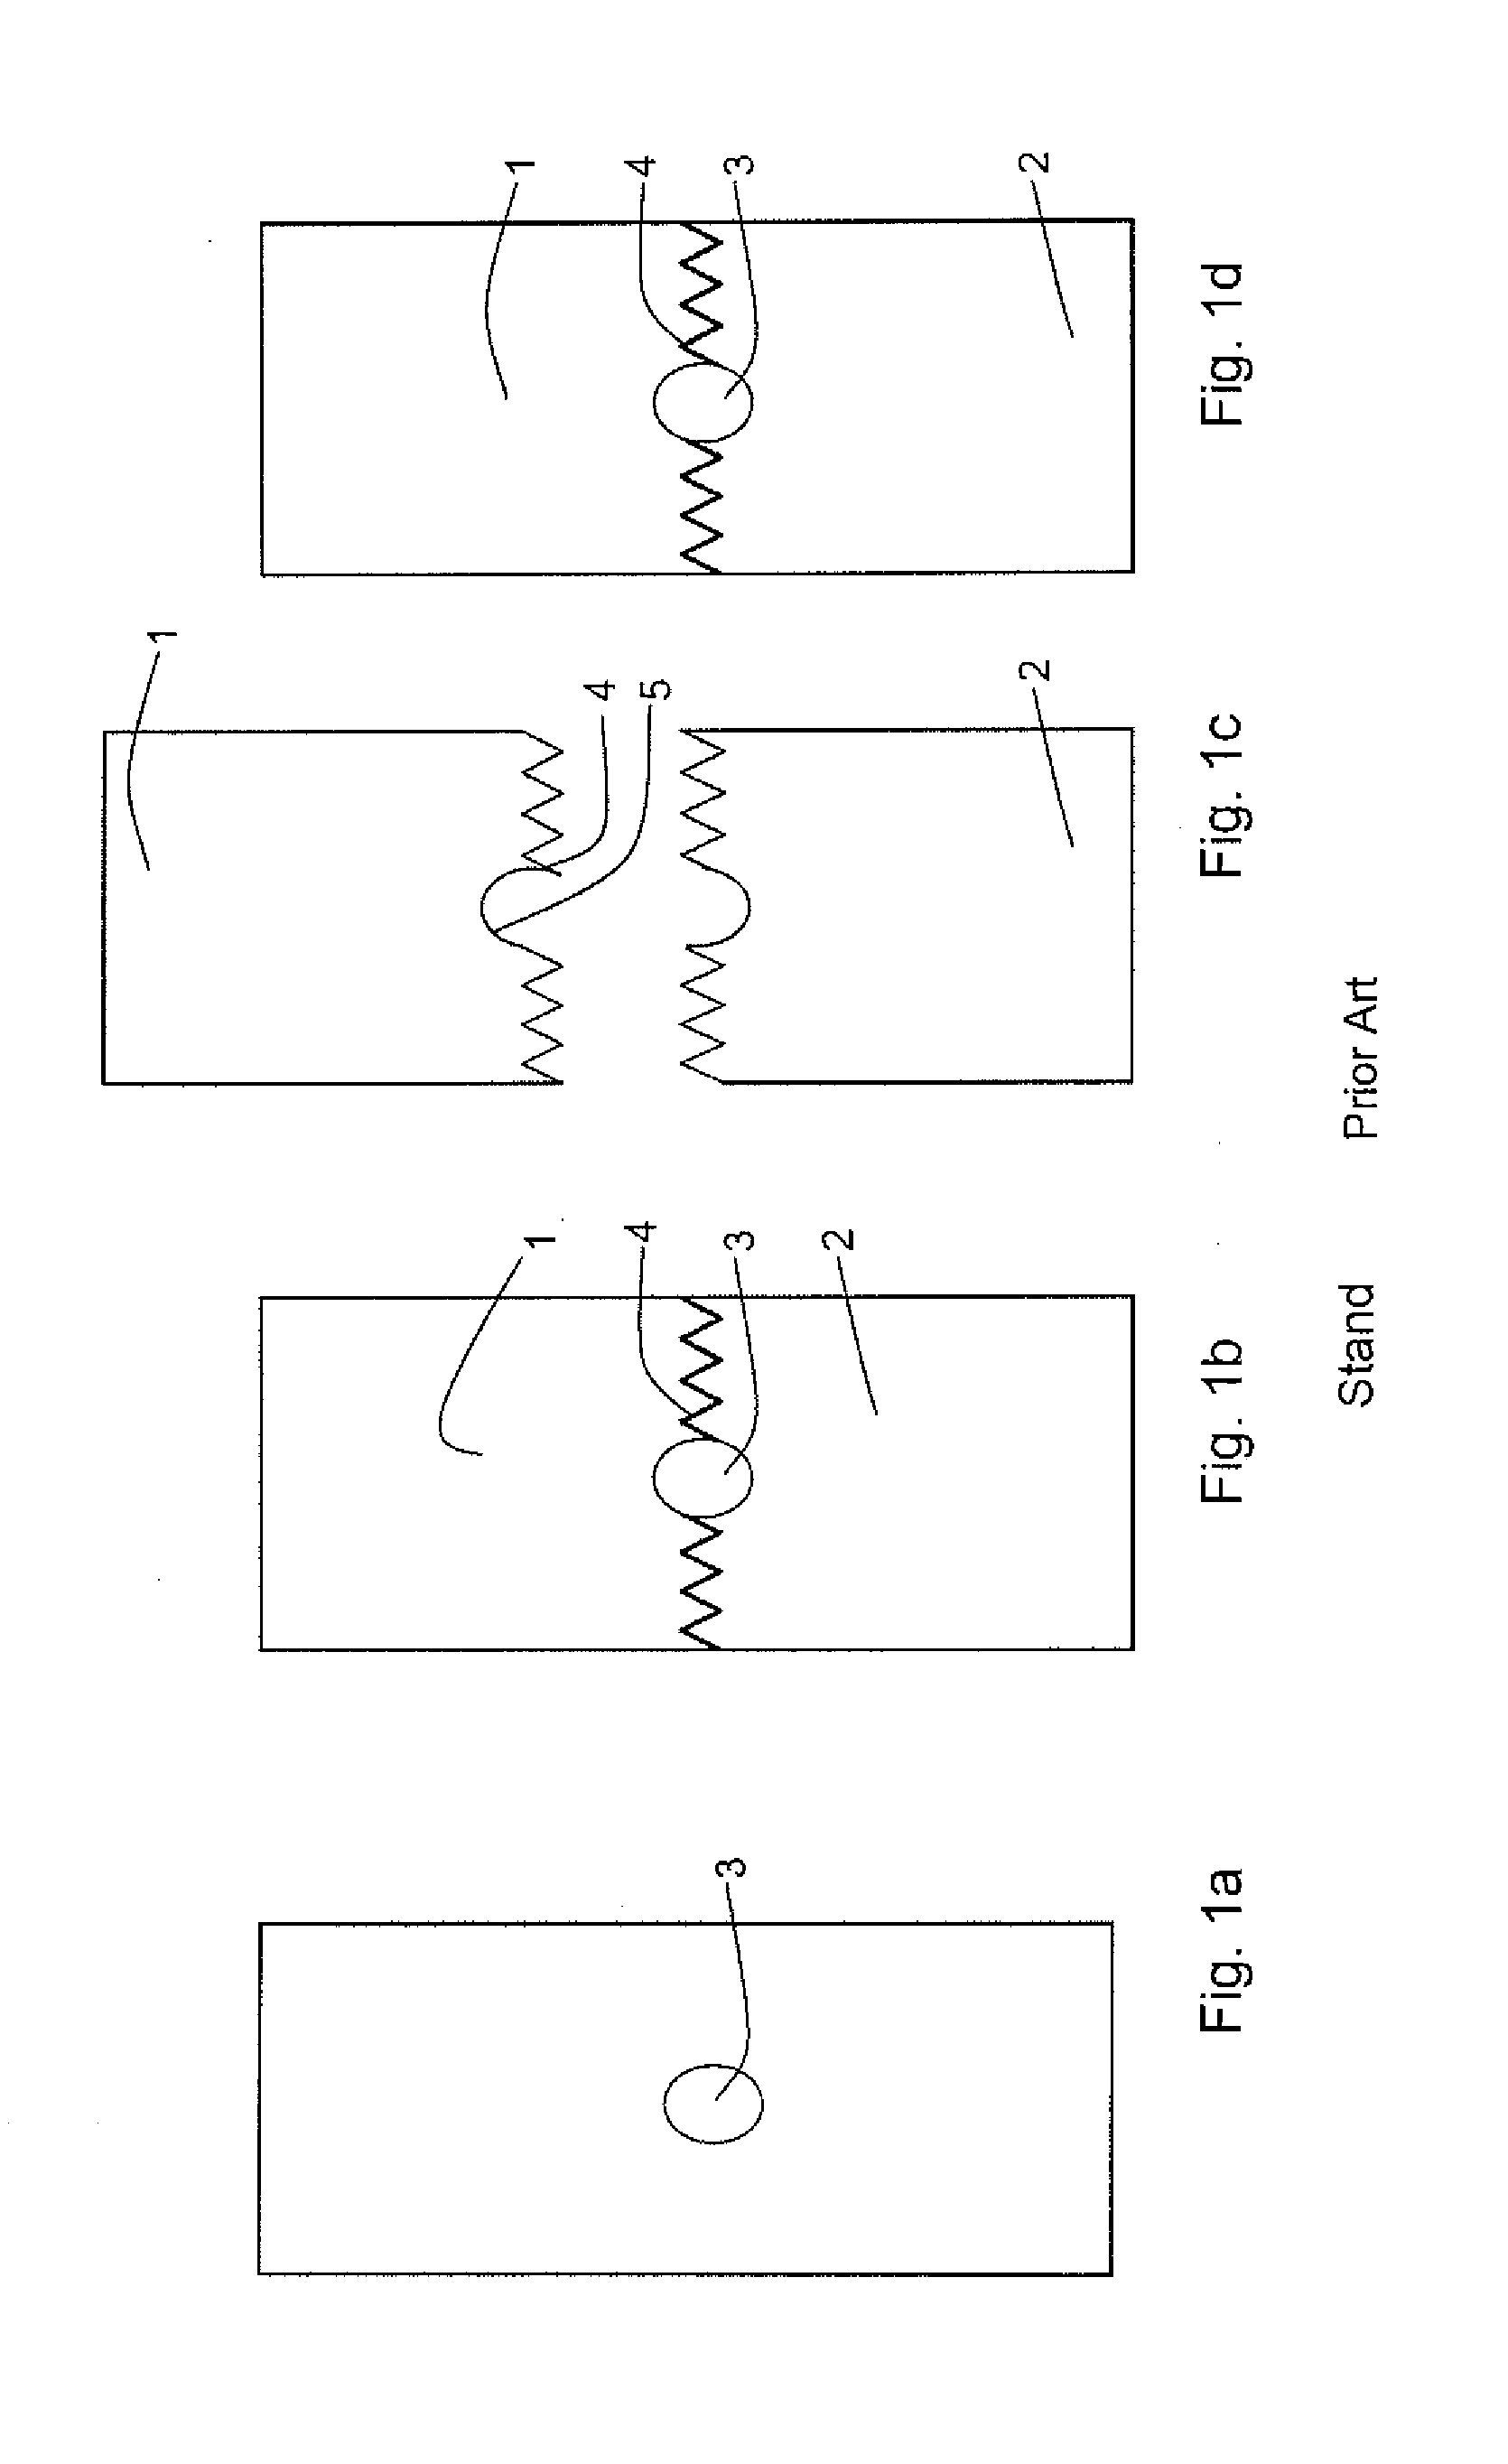 Process for Producing Metallic Components